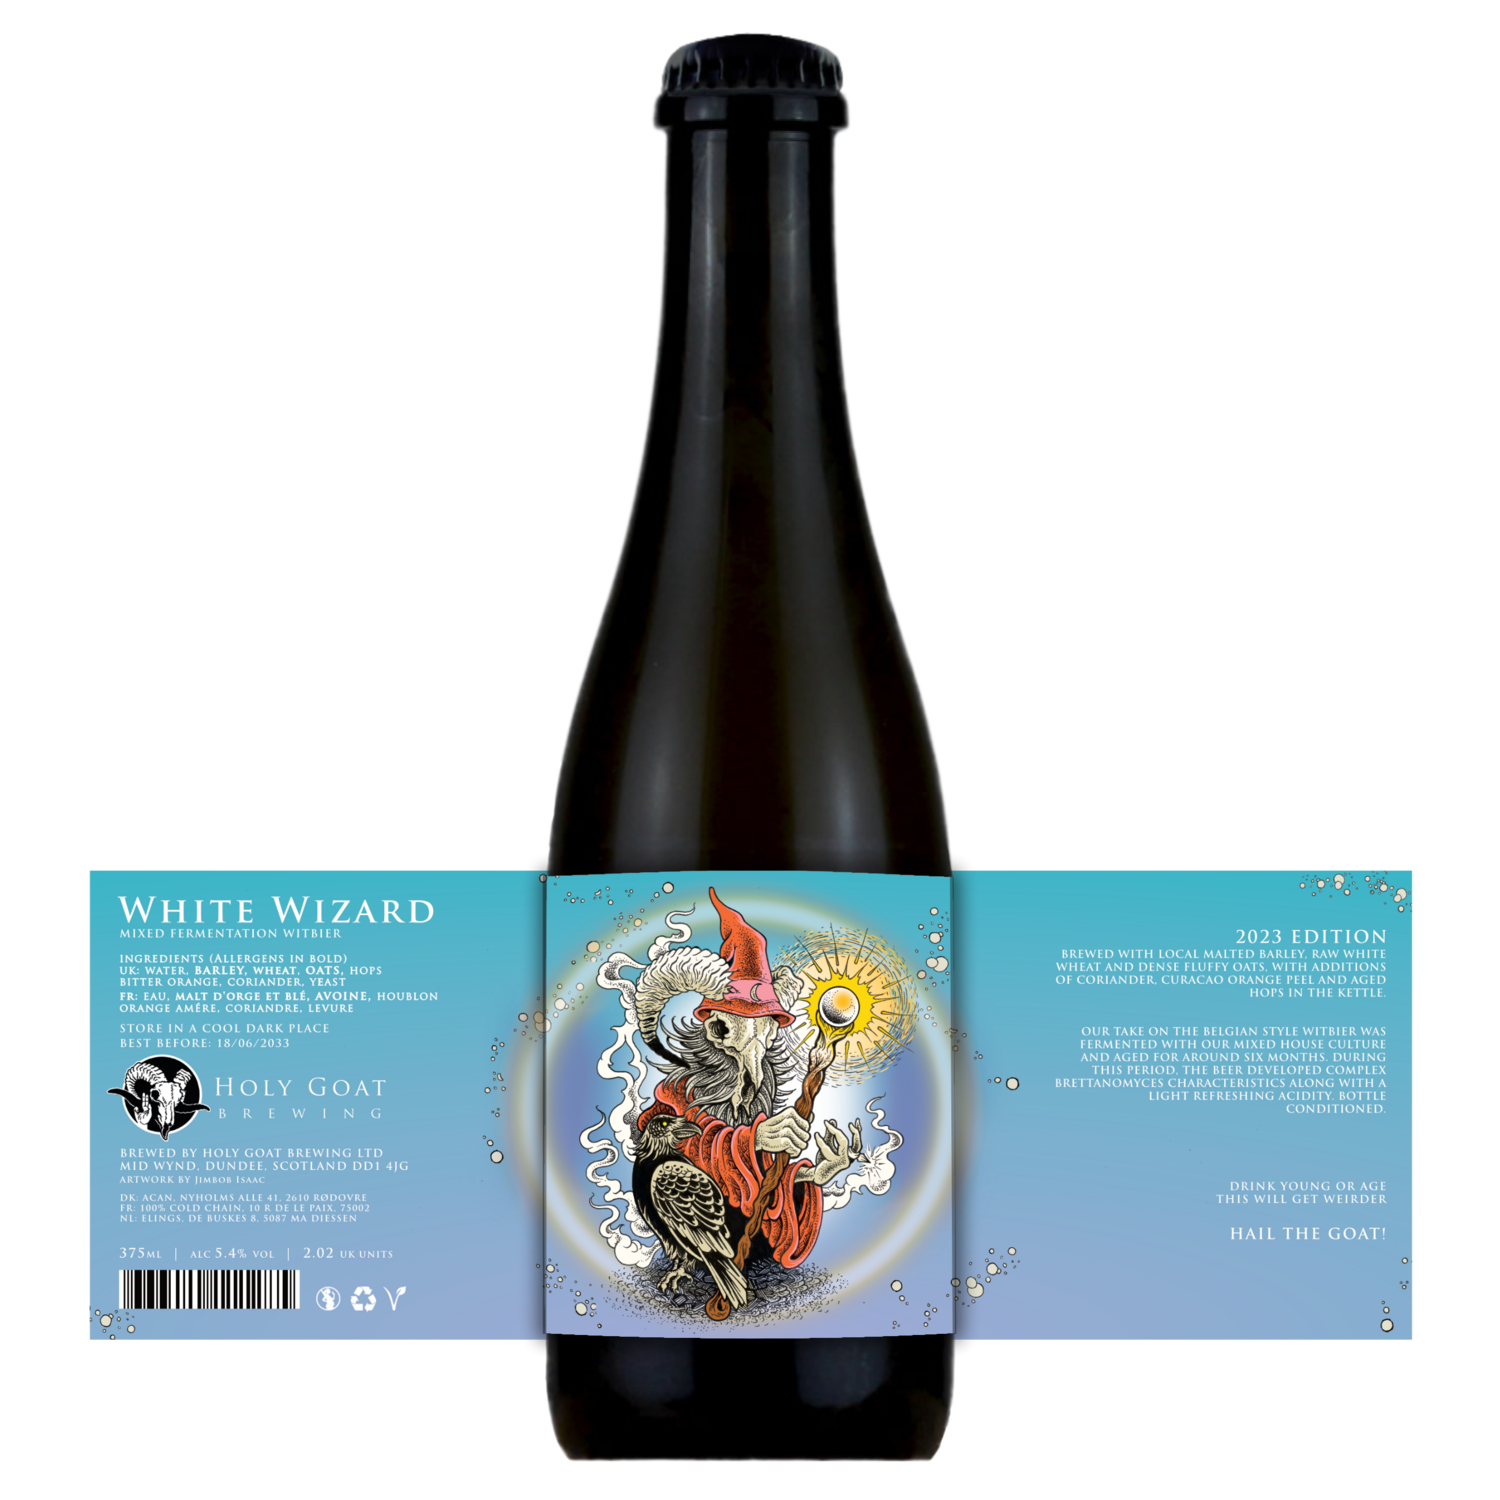 Holy Goat White Wizard 2023 Mixed Ferm Witbier